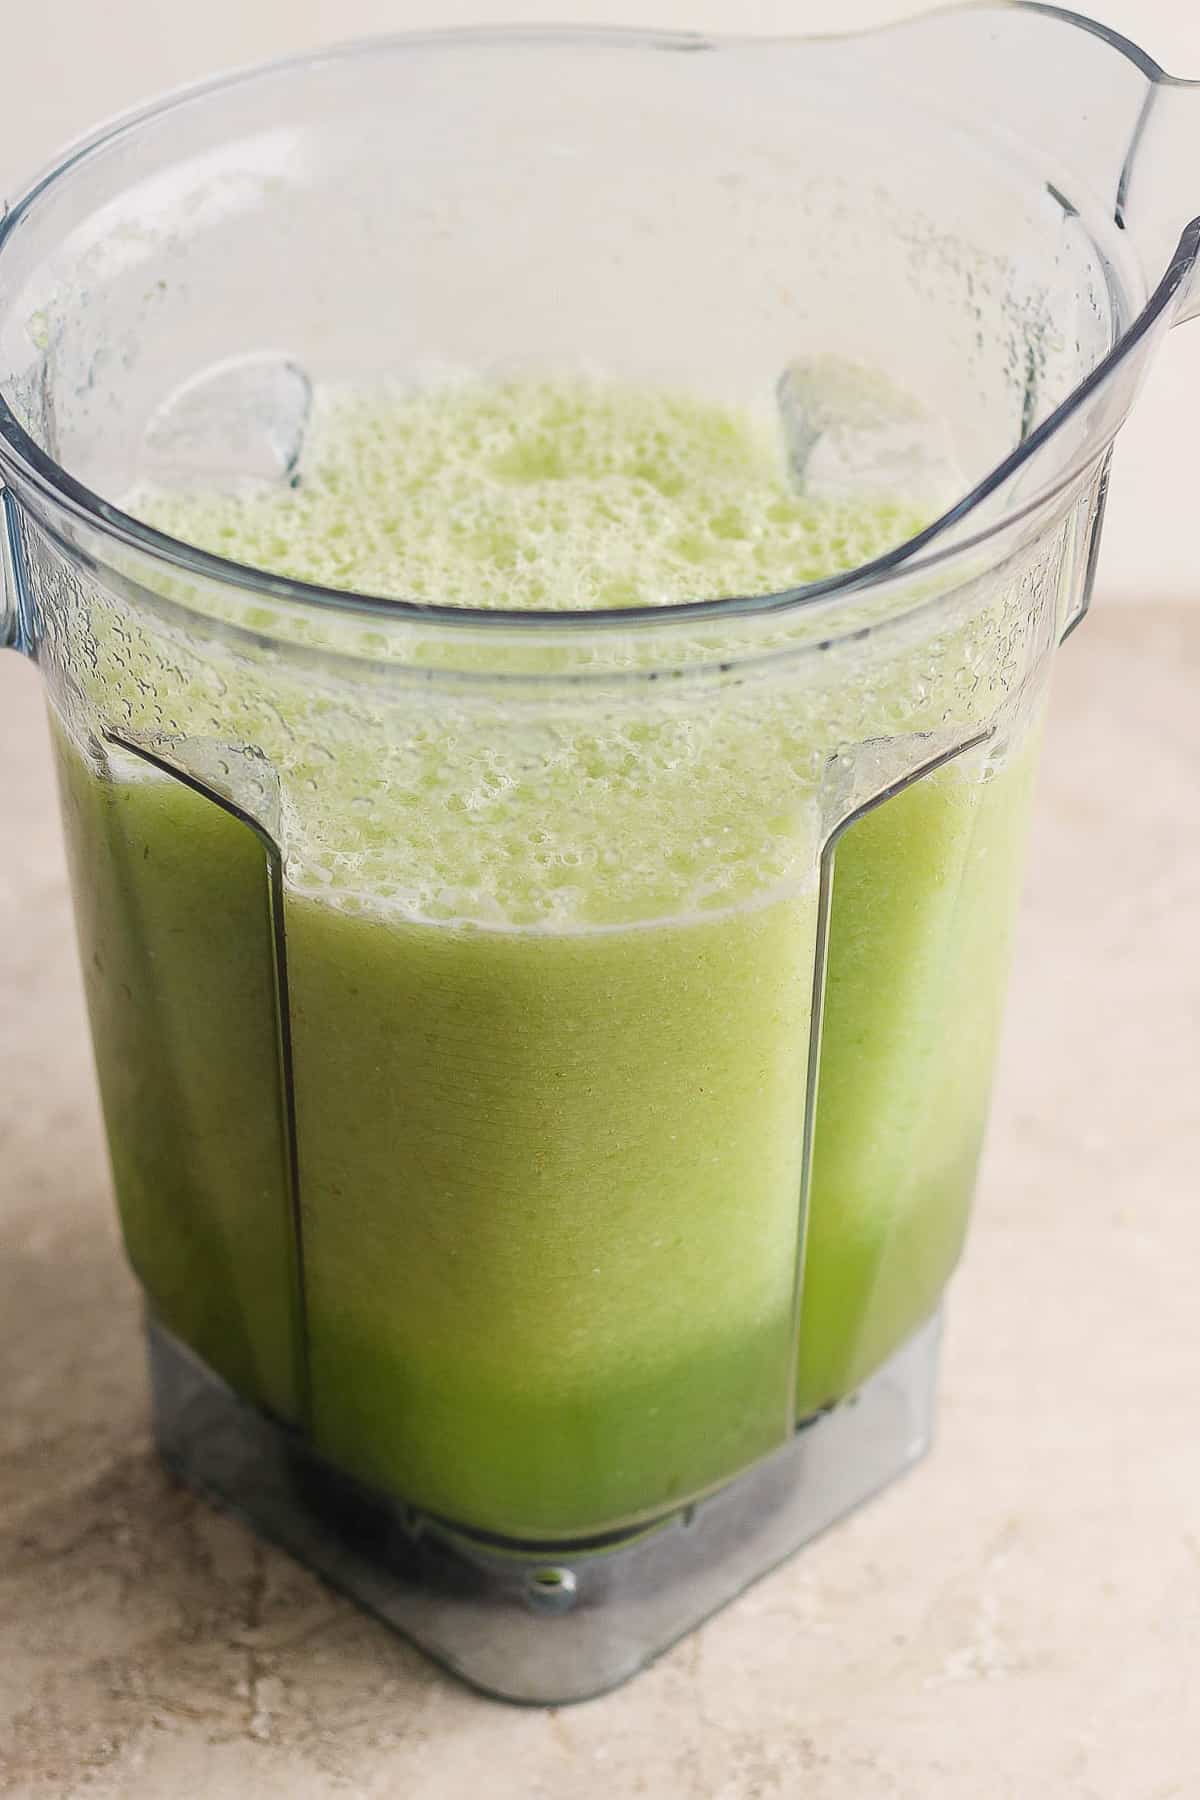 Blended agua de pepino in a blender before being strained.